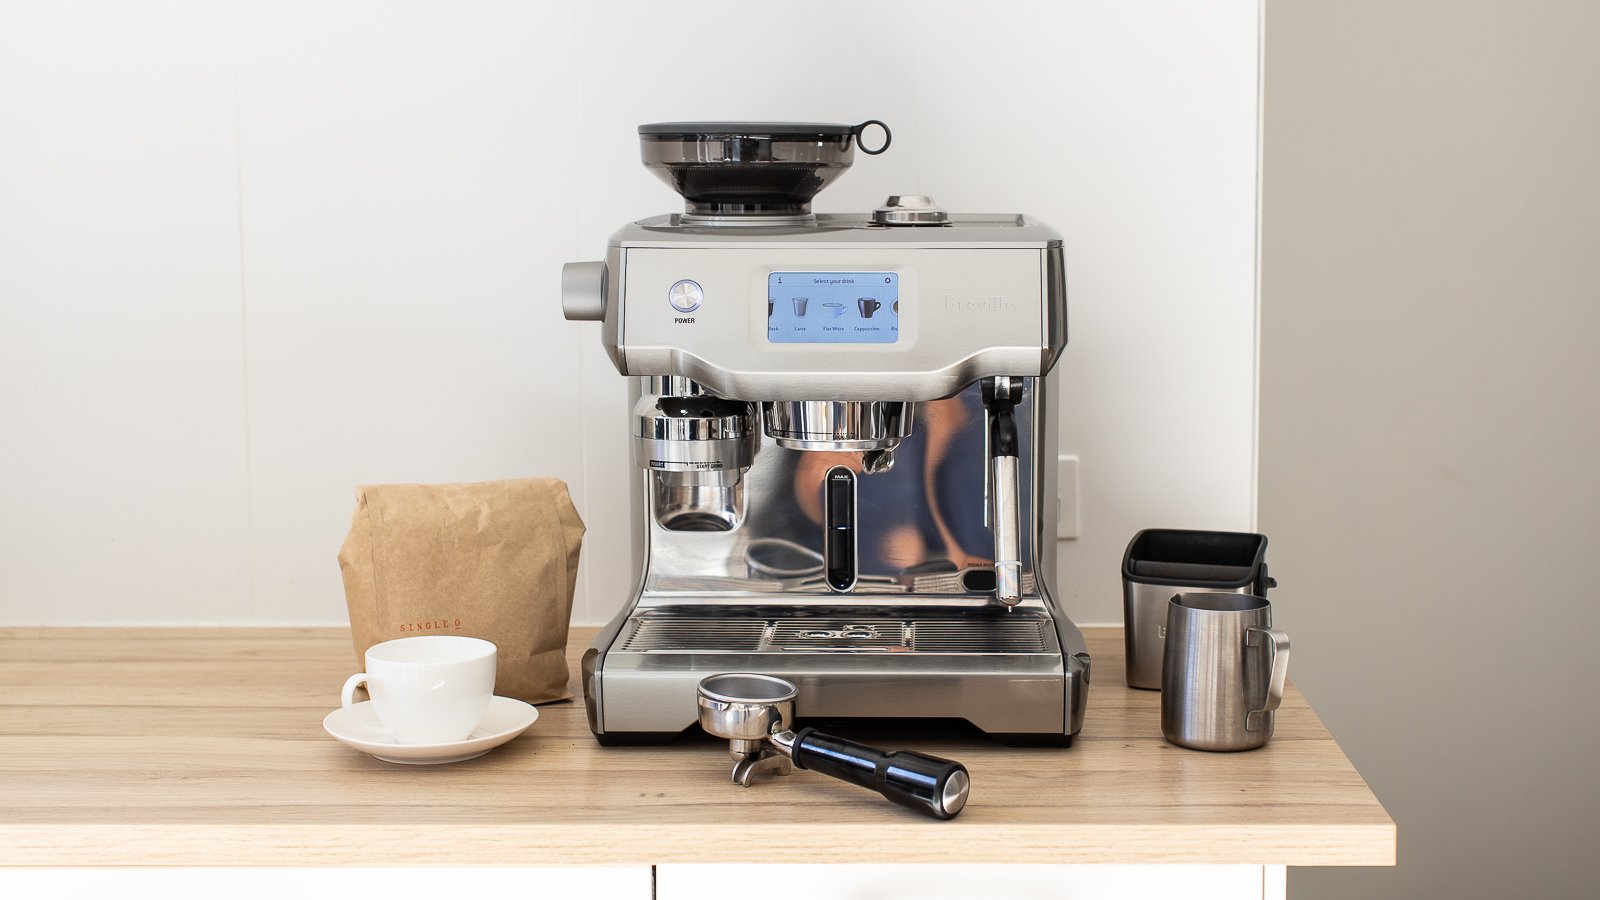 https://www.bosshunting.com.au/cdn-cgi/imagedelivery/izM8XxyLg9MD6py1ribxJw/www.bosshunting.com.au/2022/05/Breville-Oracle-Touch-Review-2.jpg/w=1600